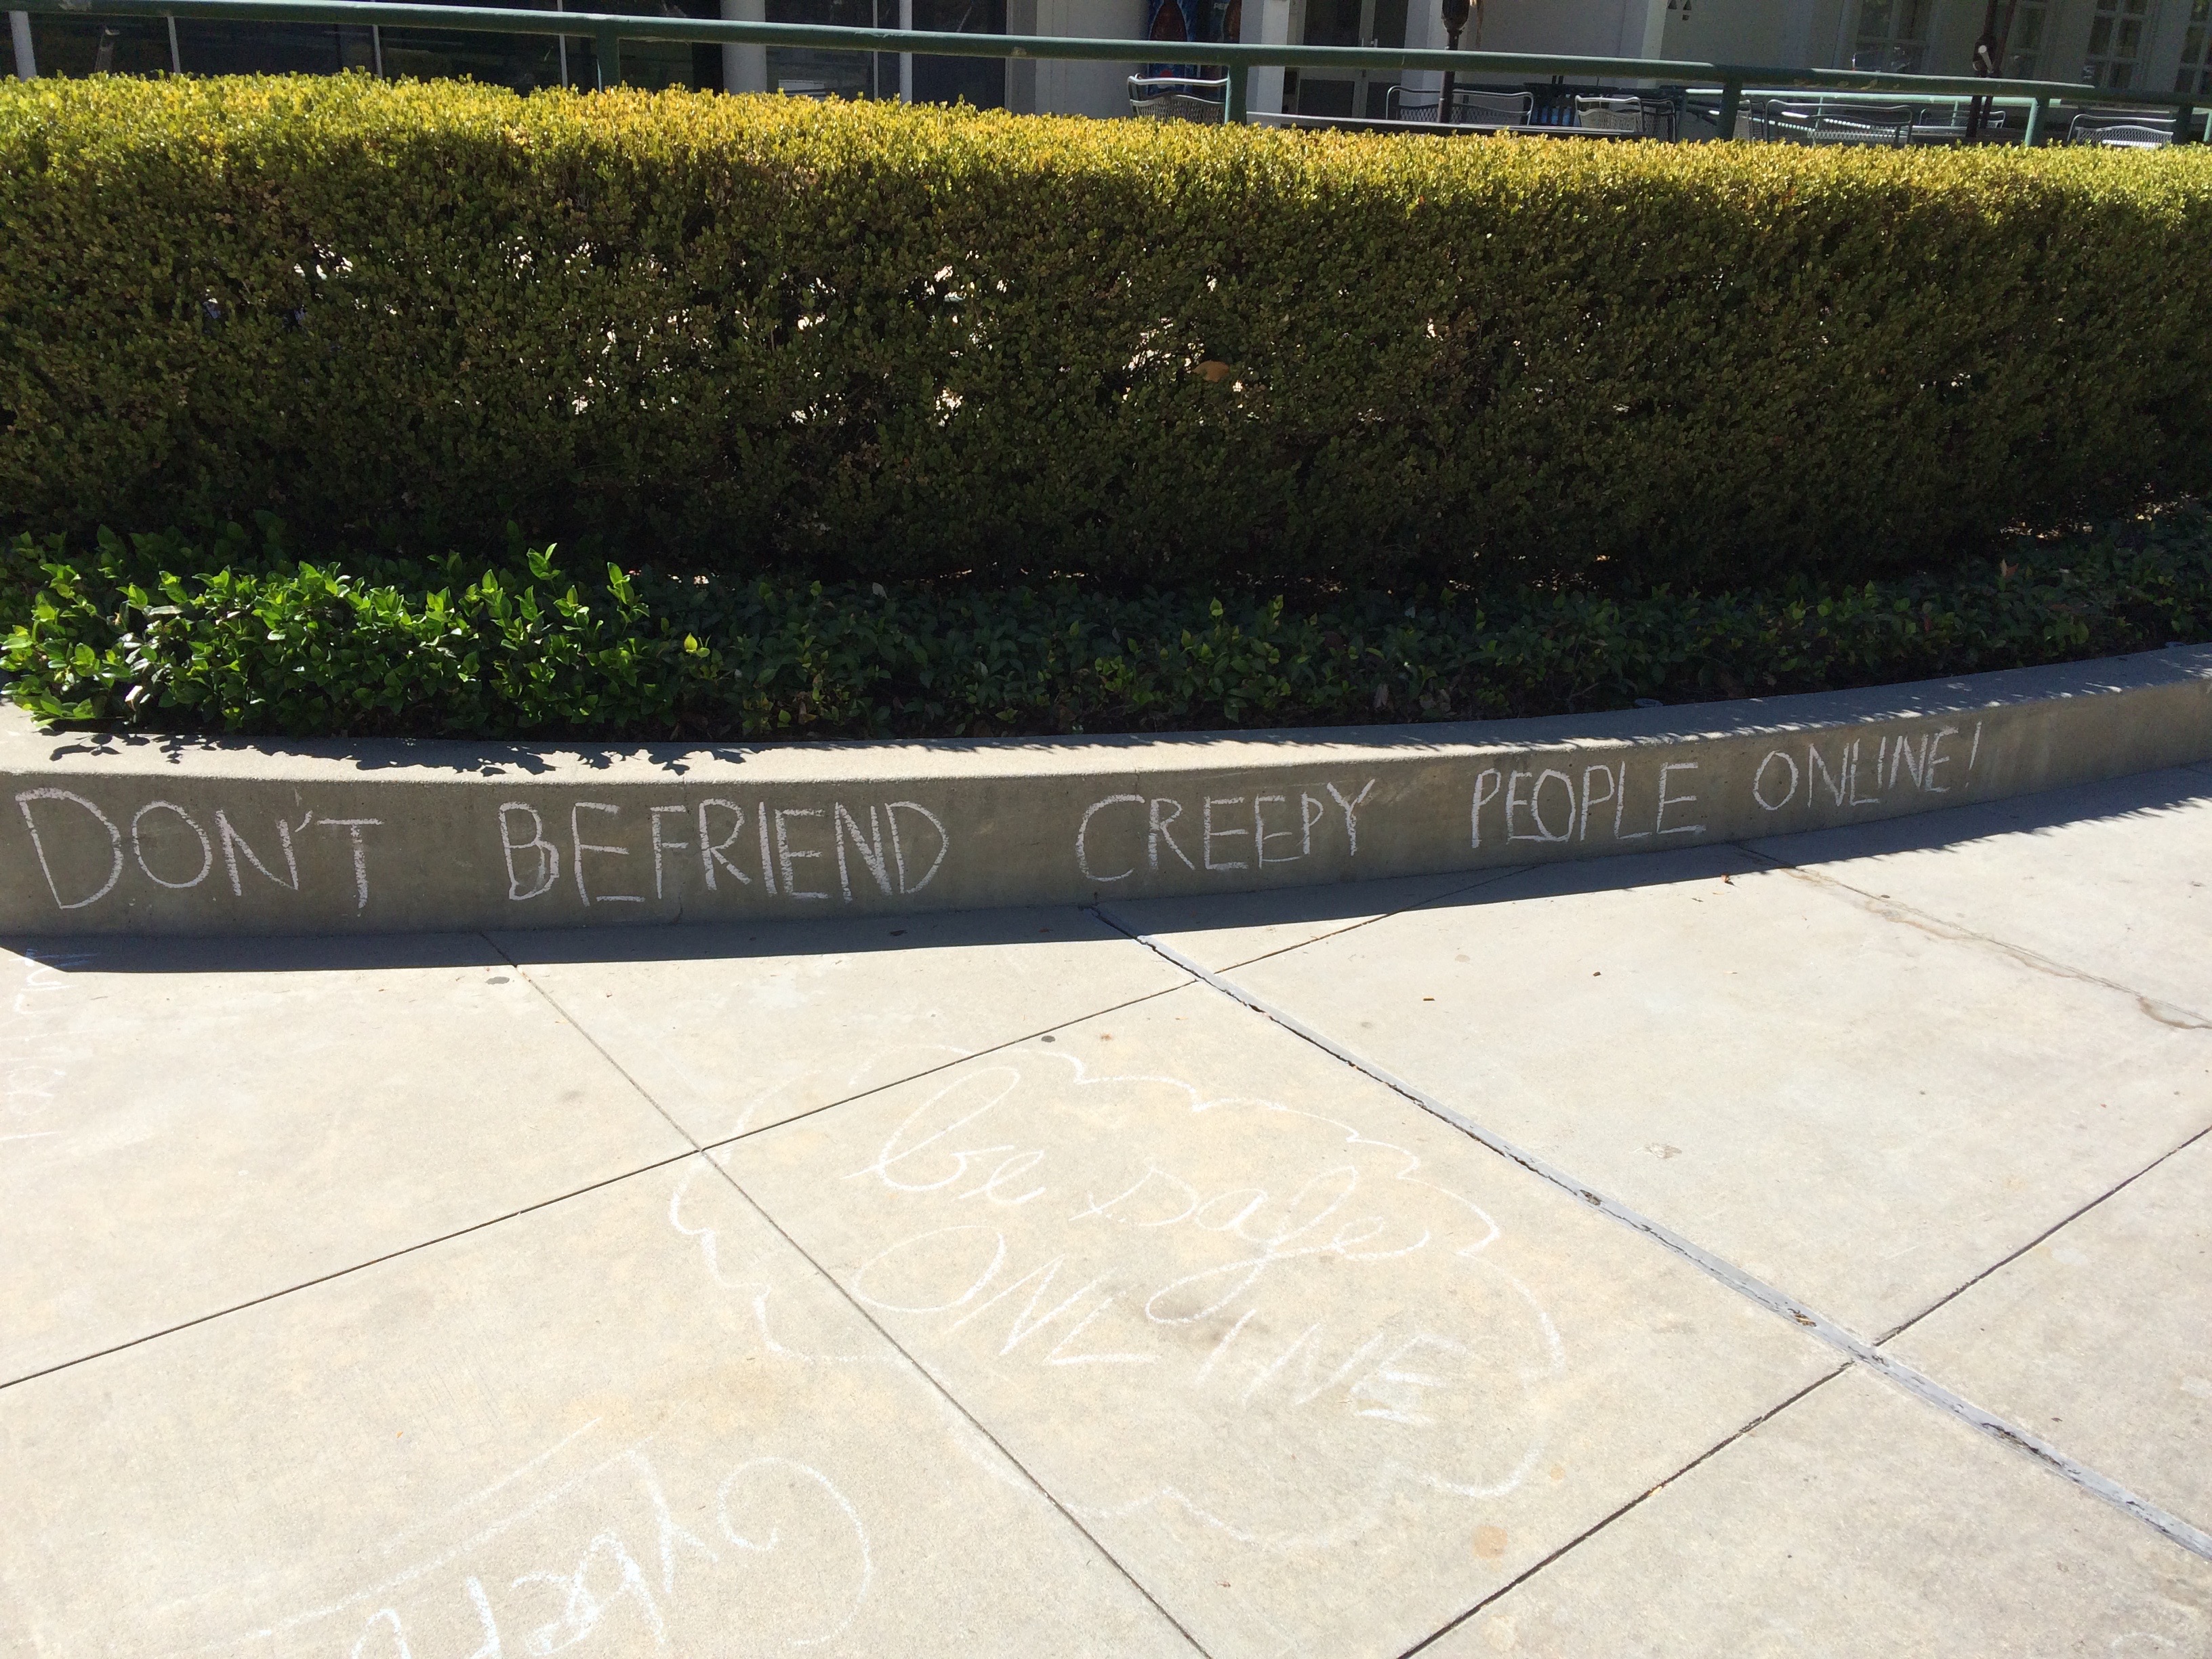 "Don't befriend creepy people online," says a chalk text.